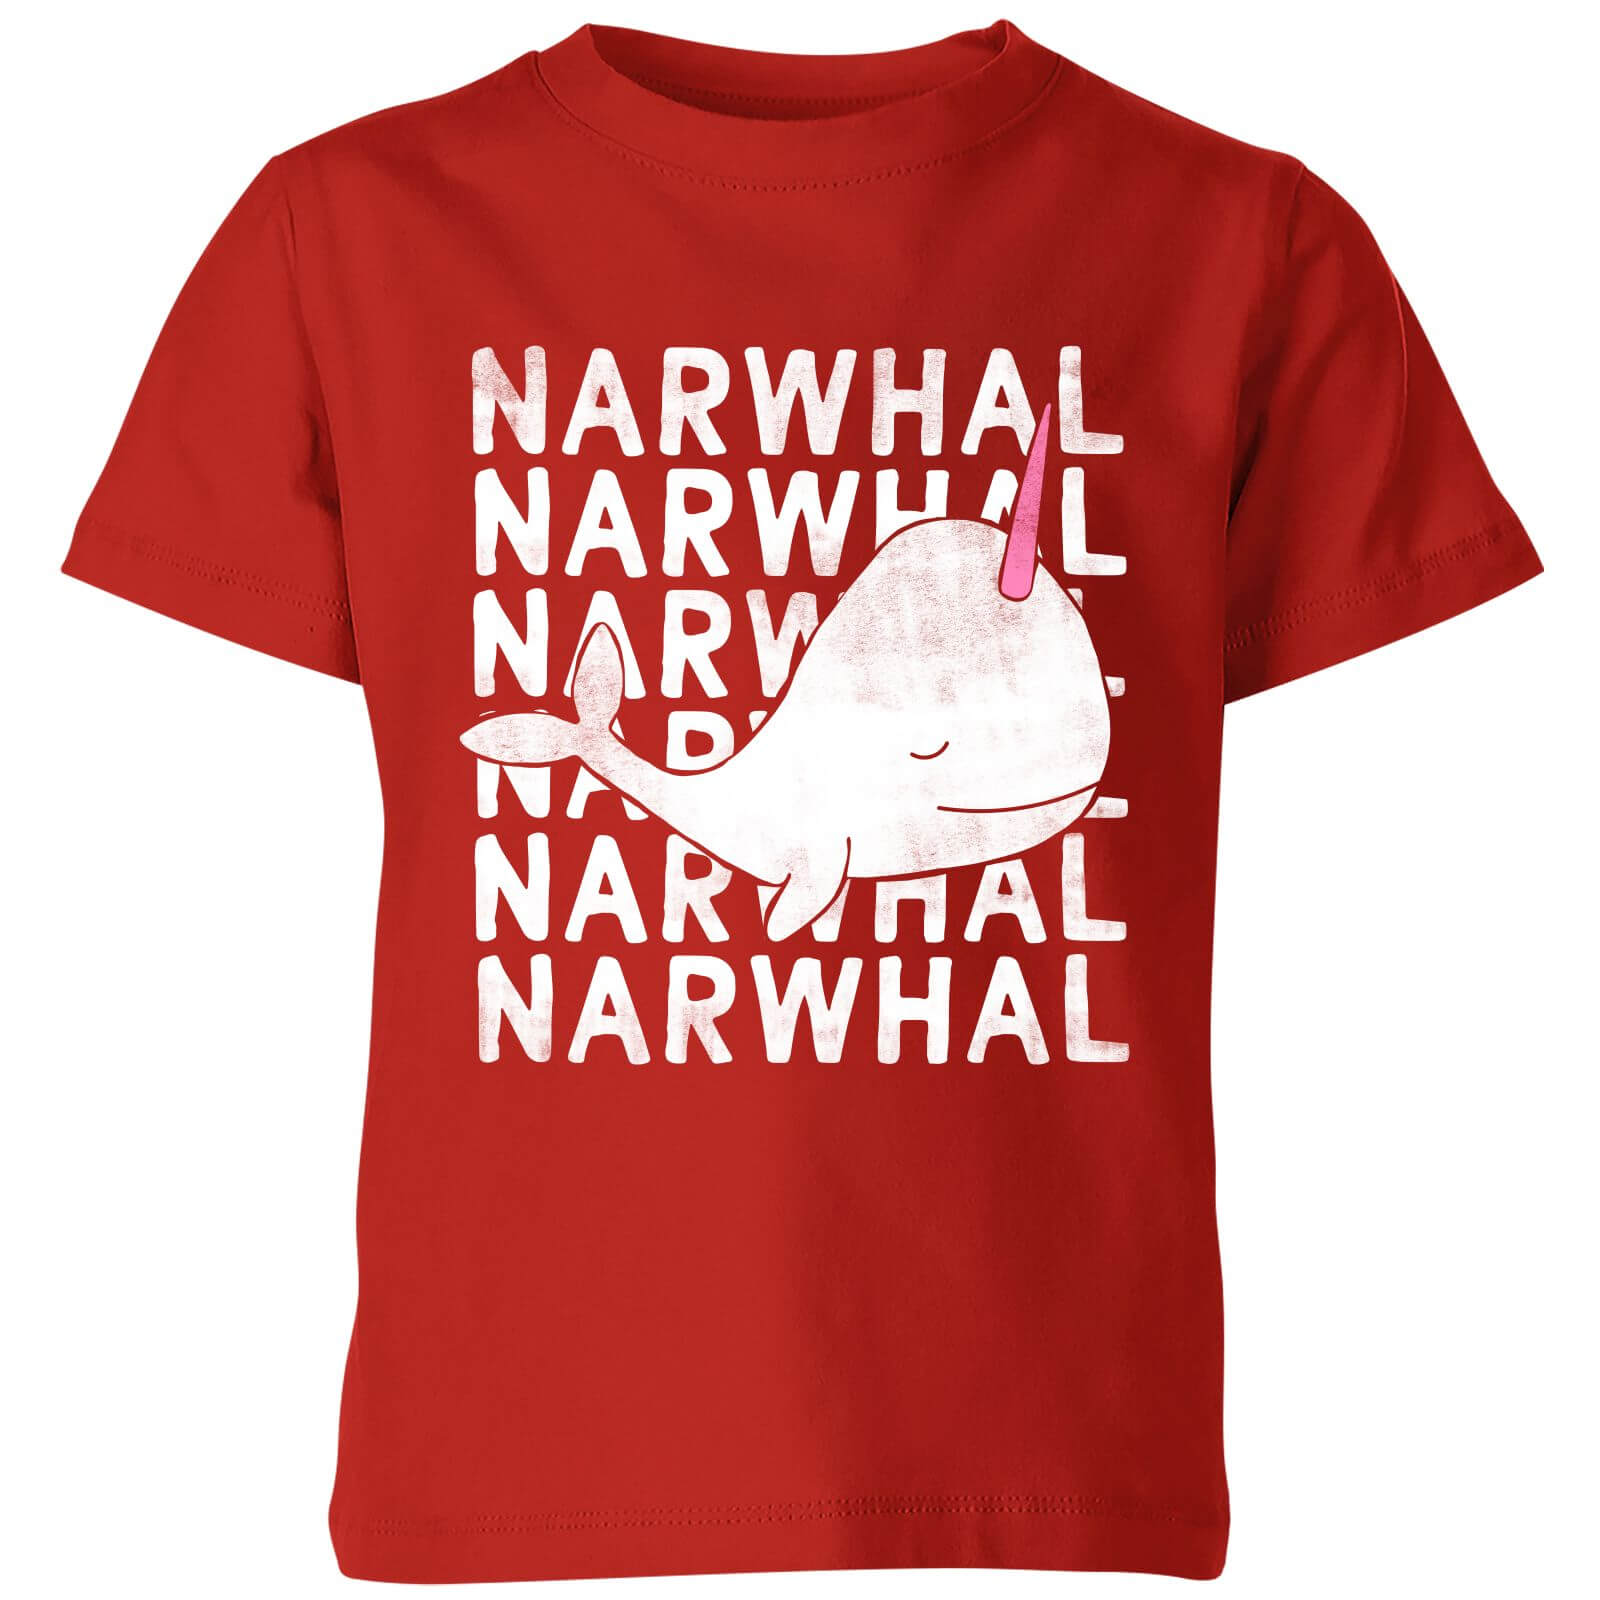 My Little Rascal Narwhal Kids' T-Shirt - Red - 3-4 Years - Red